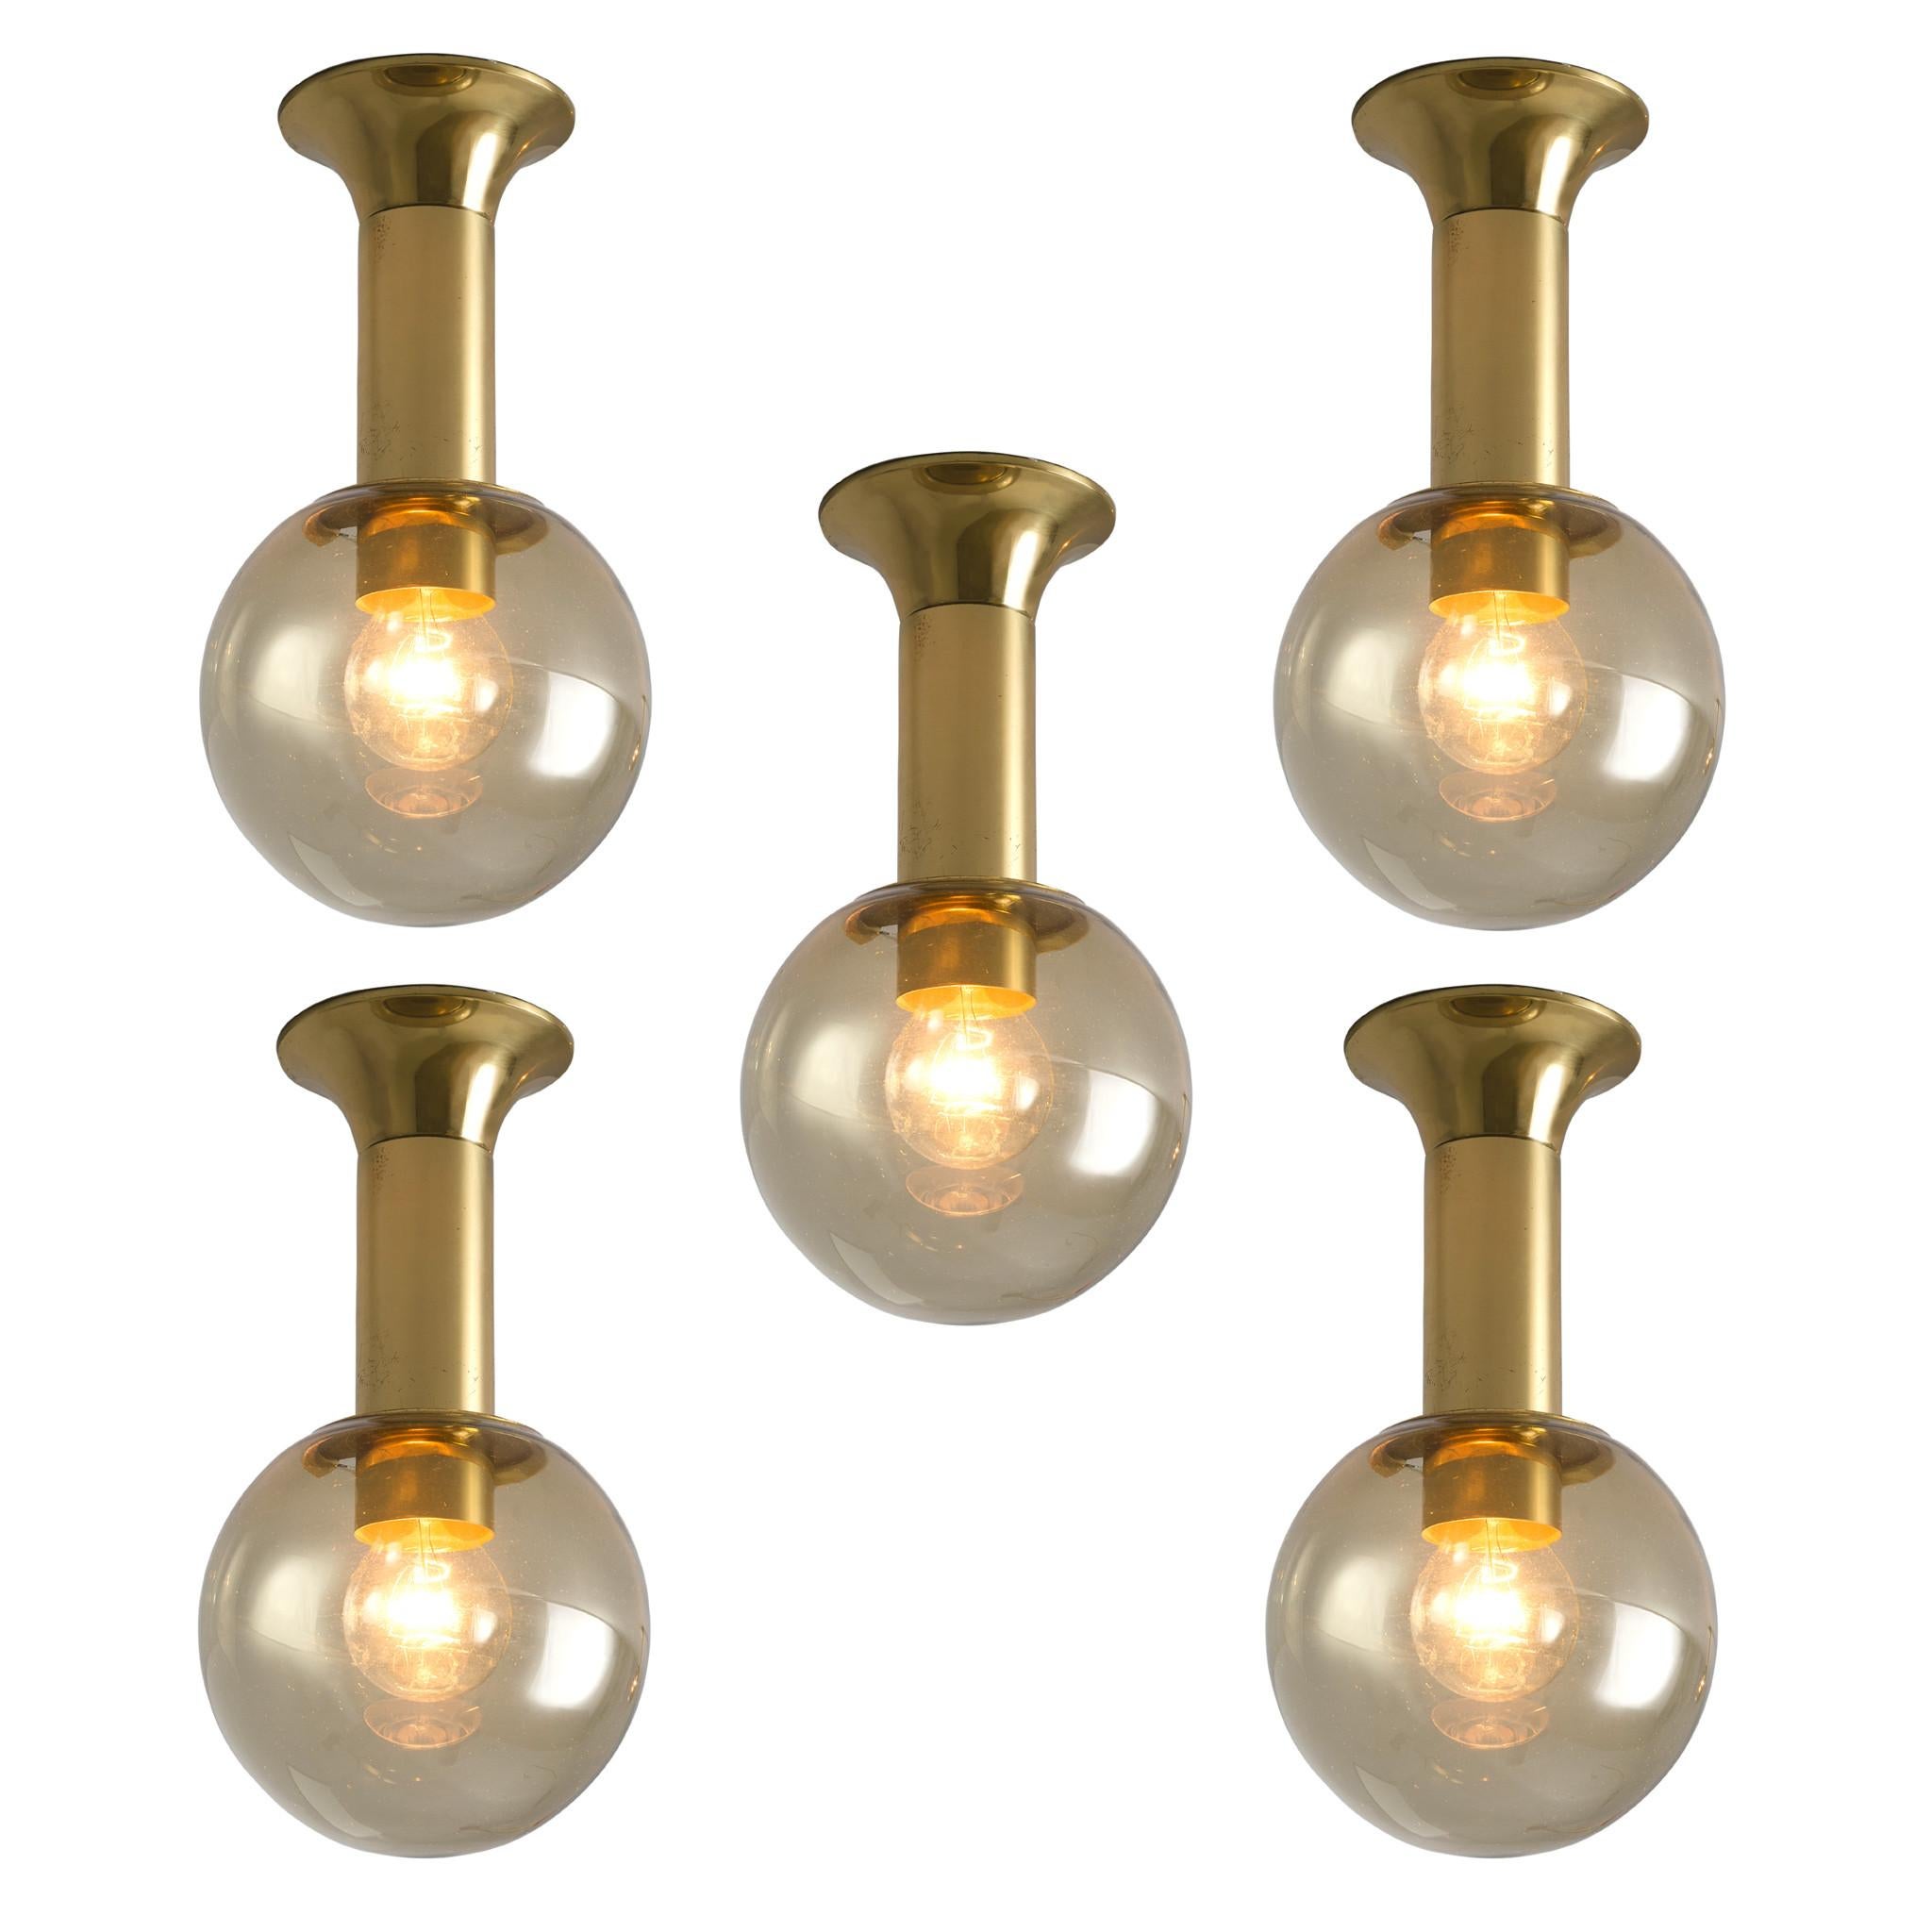 Flush mount lights, in glass and brass, Europe, 1970s.

Set of modern and minimalistic ceiling lights in brass and glass. Each light consist of an elegant, round brass fixture and a glass sphere. Inside the sphere are two light-points. The